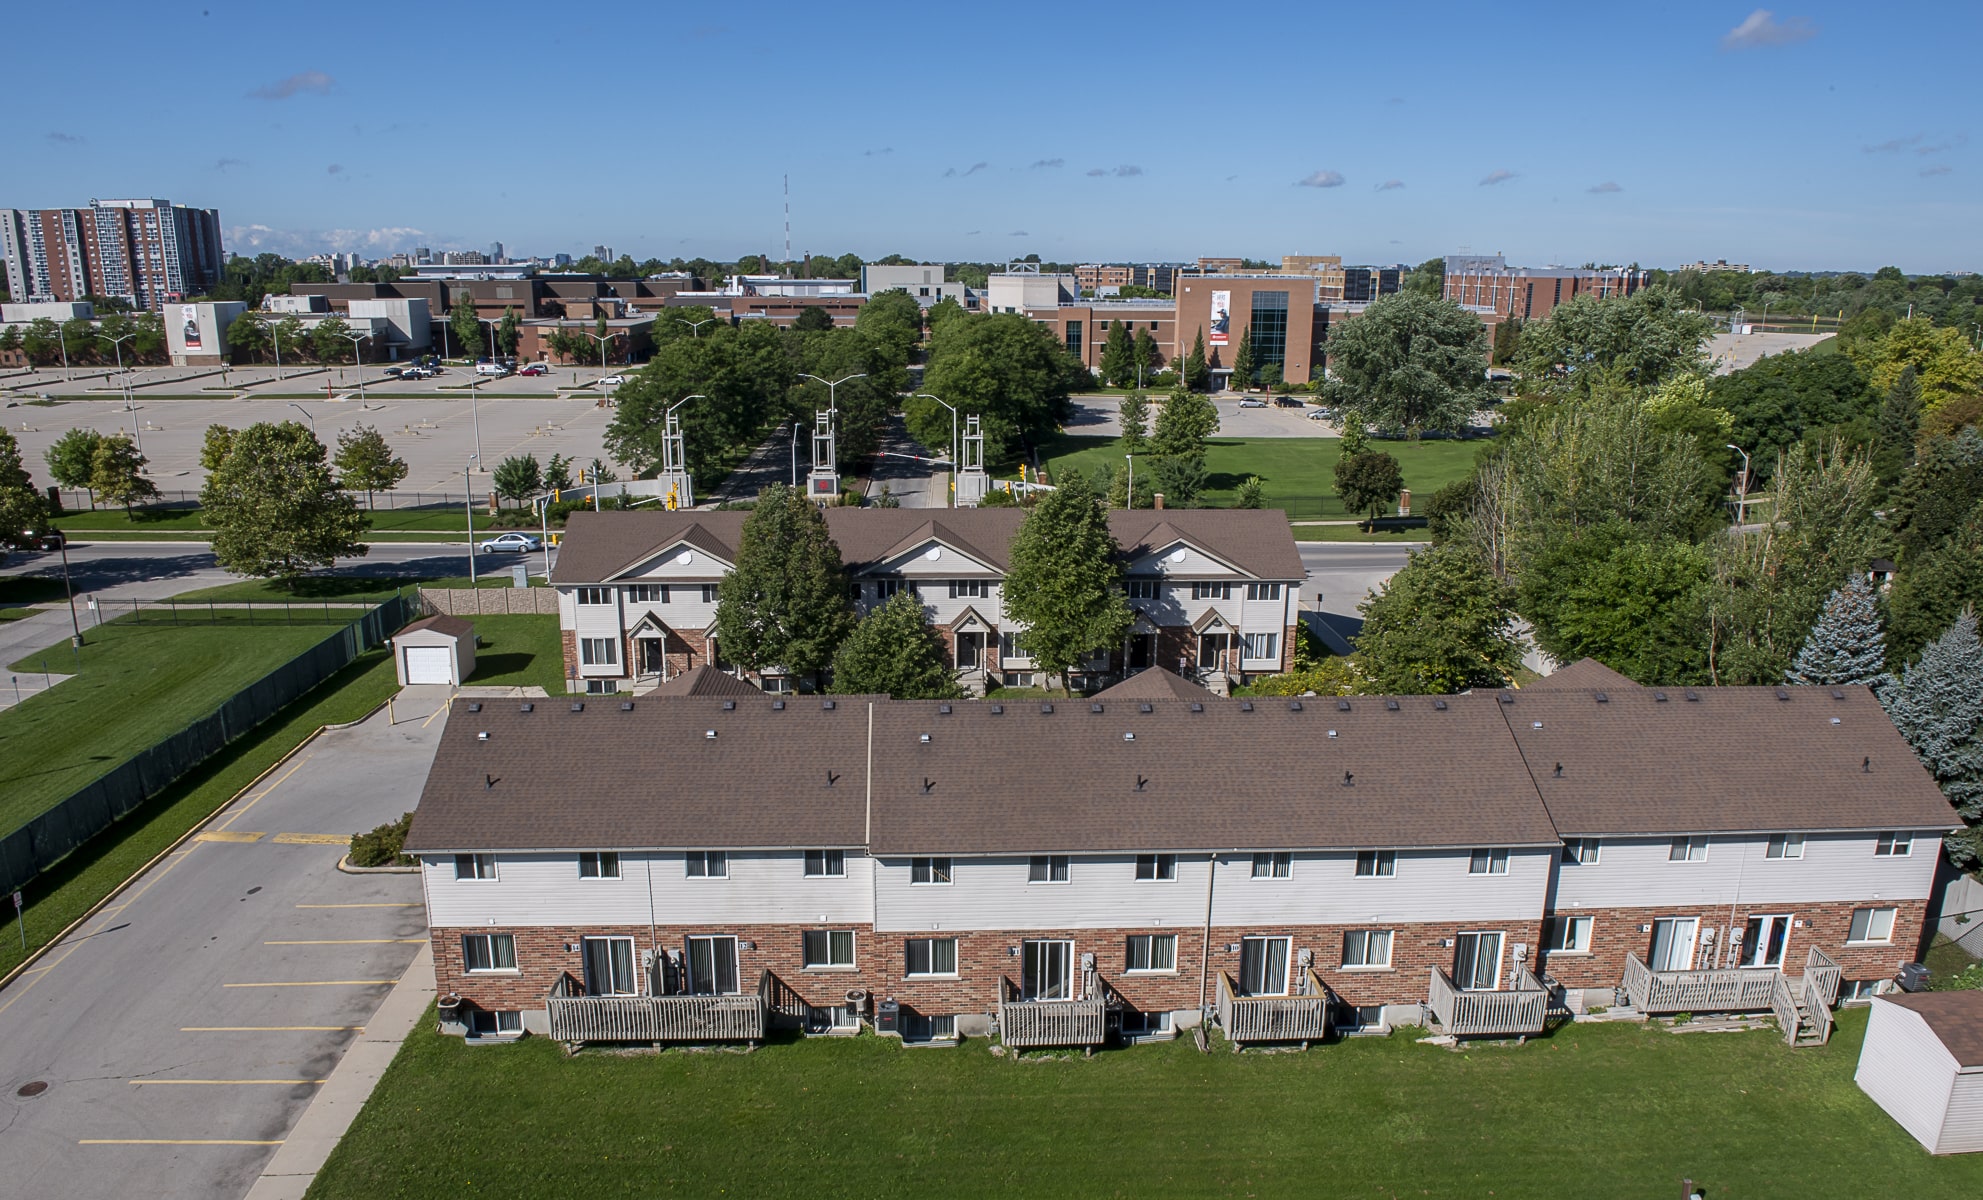 aerial view of townhouse-style residence at fanshawe